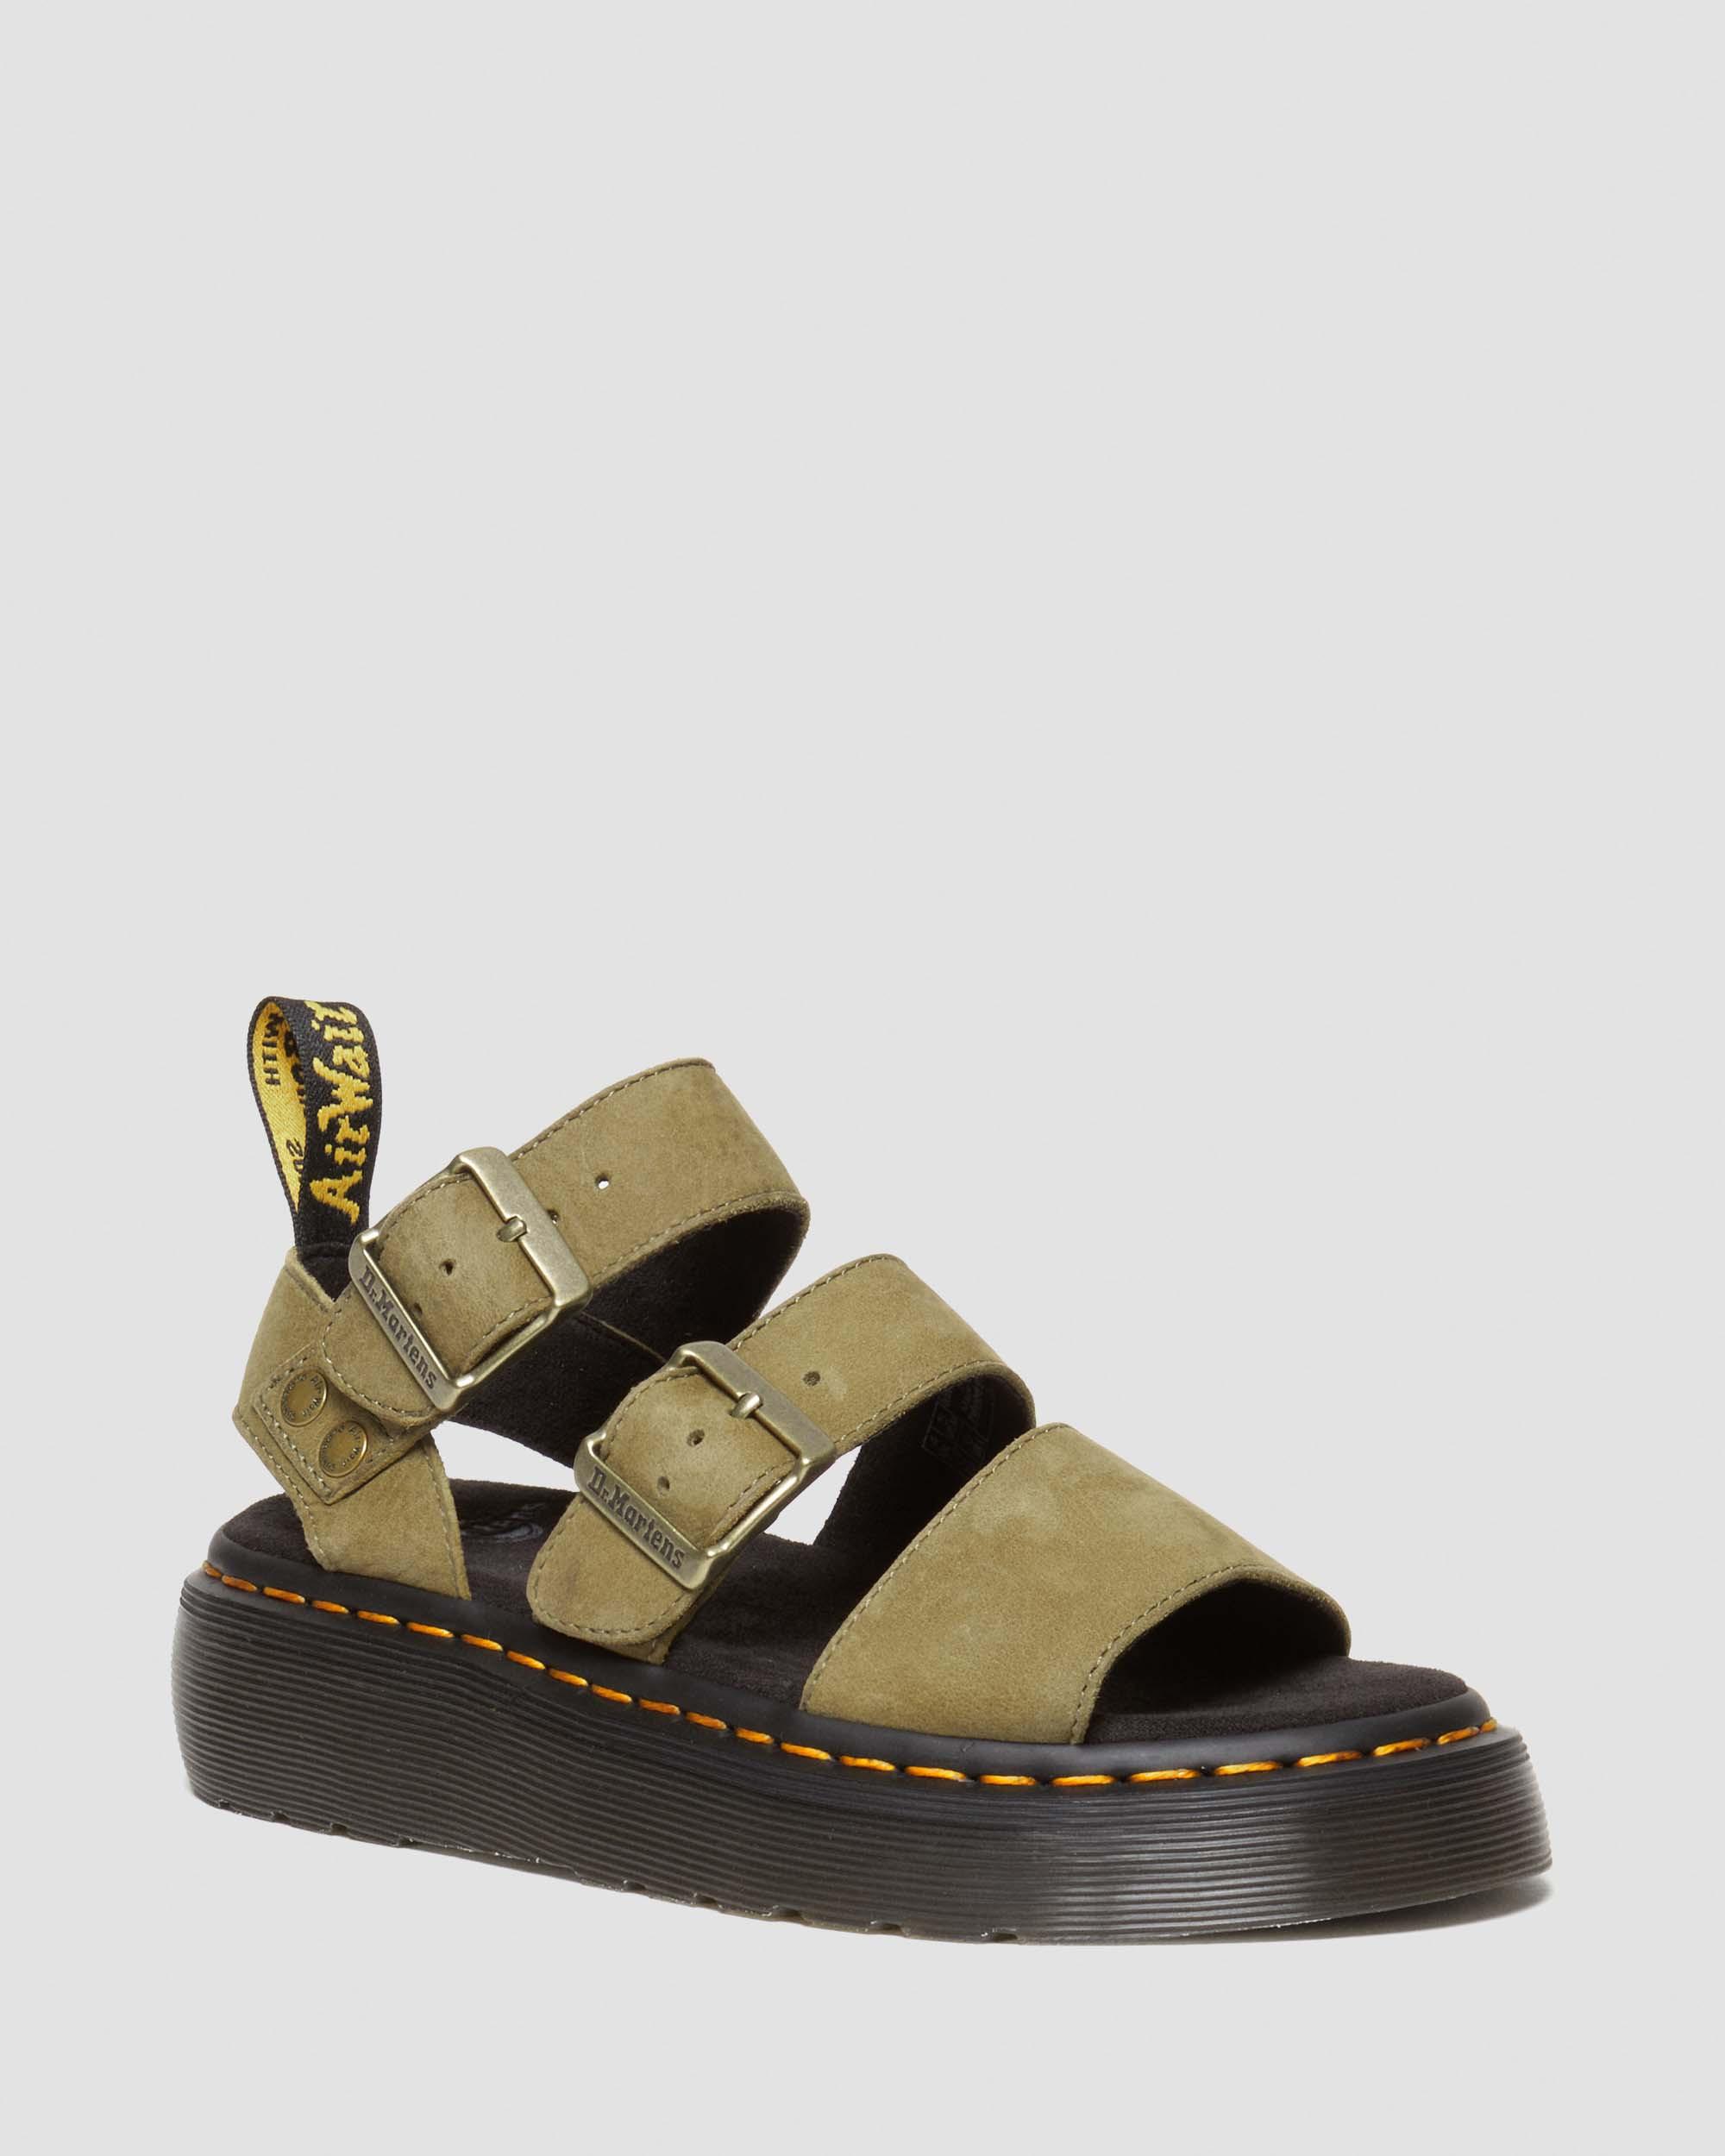 Gryphon Tumbled Nubuck Leather Platform Sandals in Muted Olive